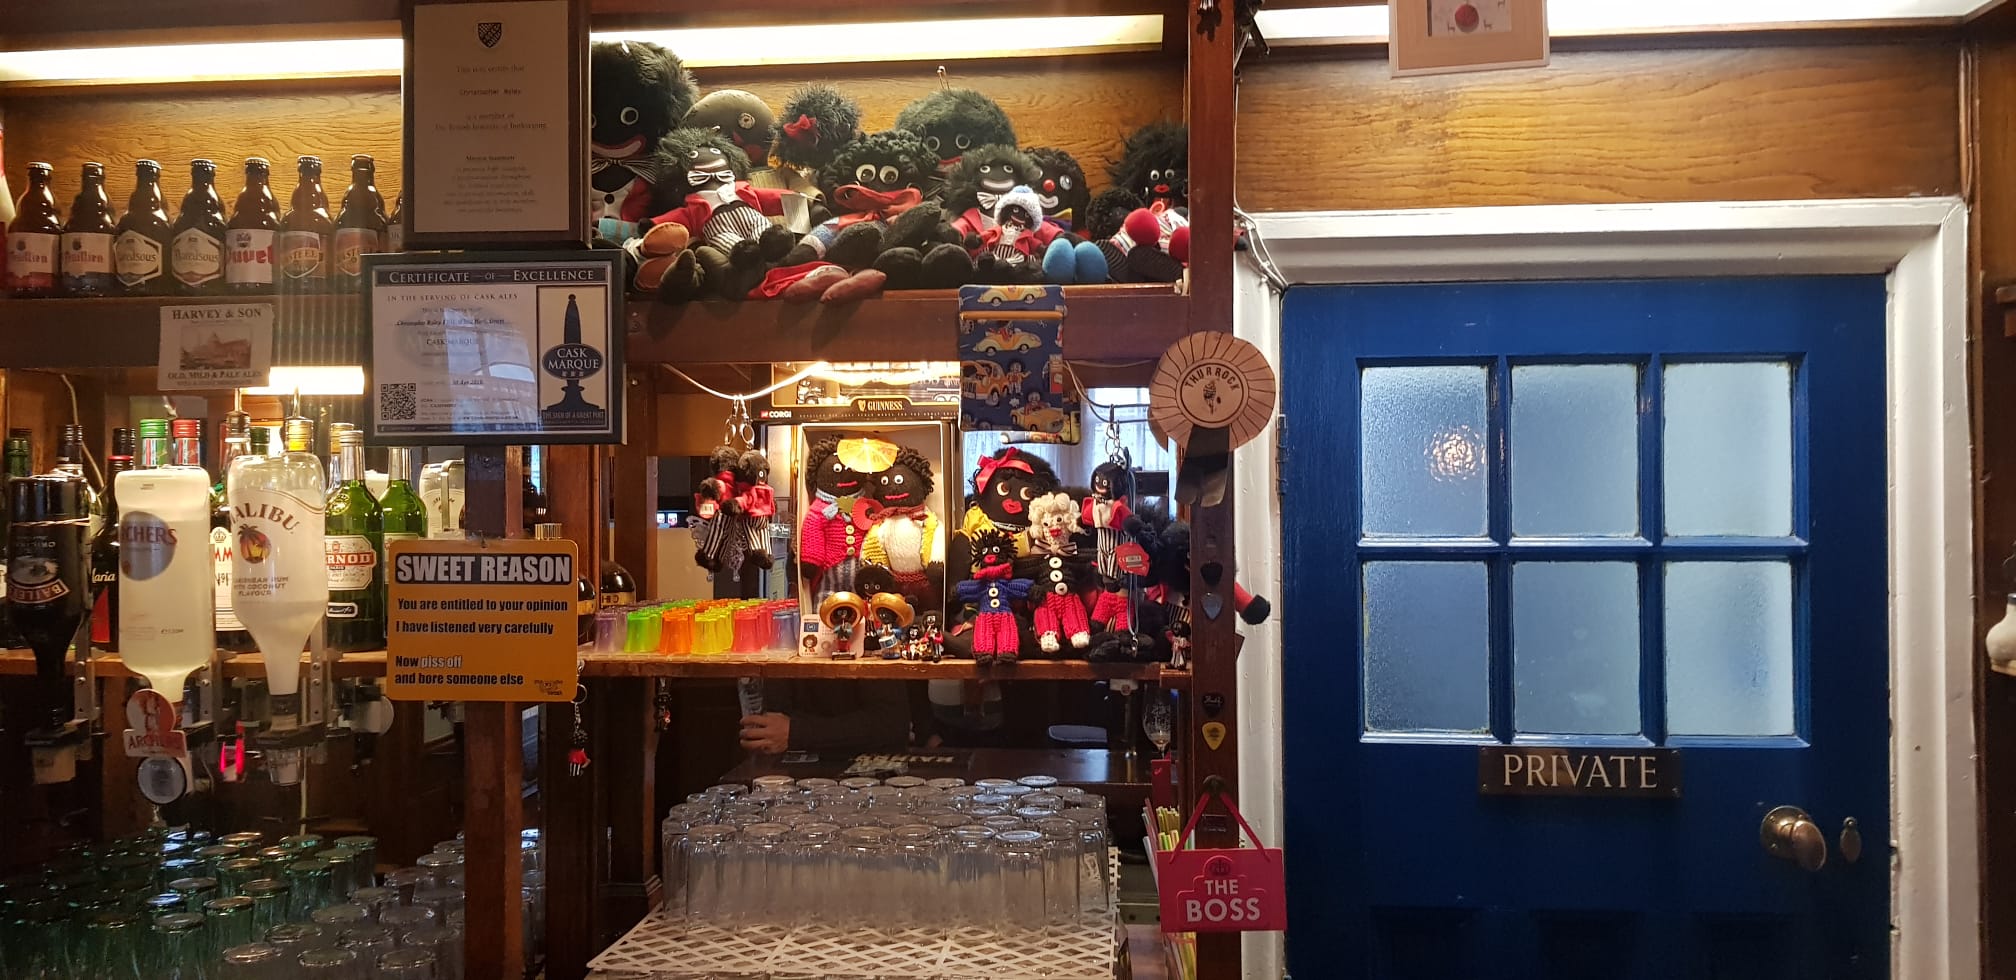 The pub landlords were reported in 2018 over the dolls